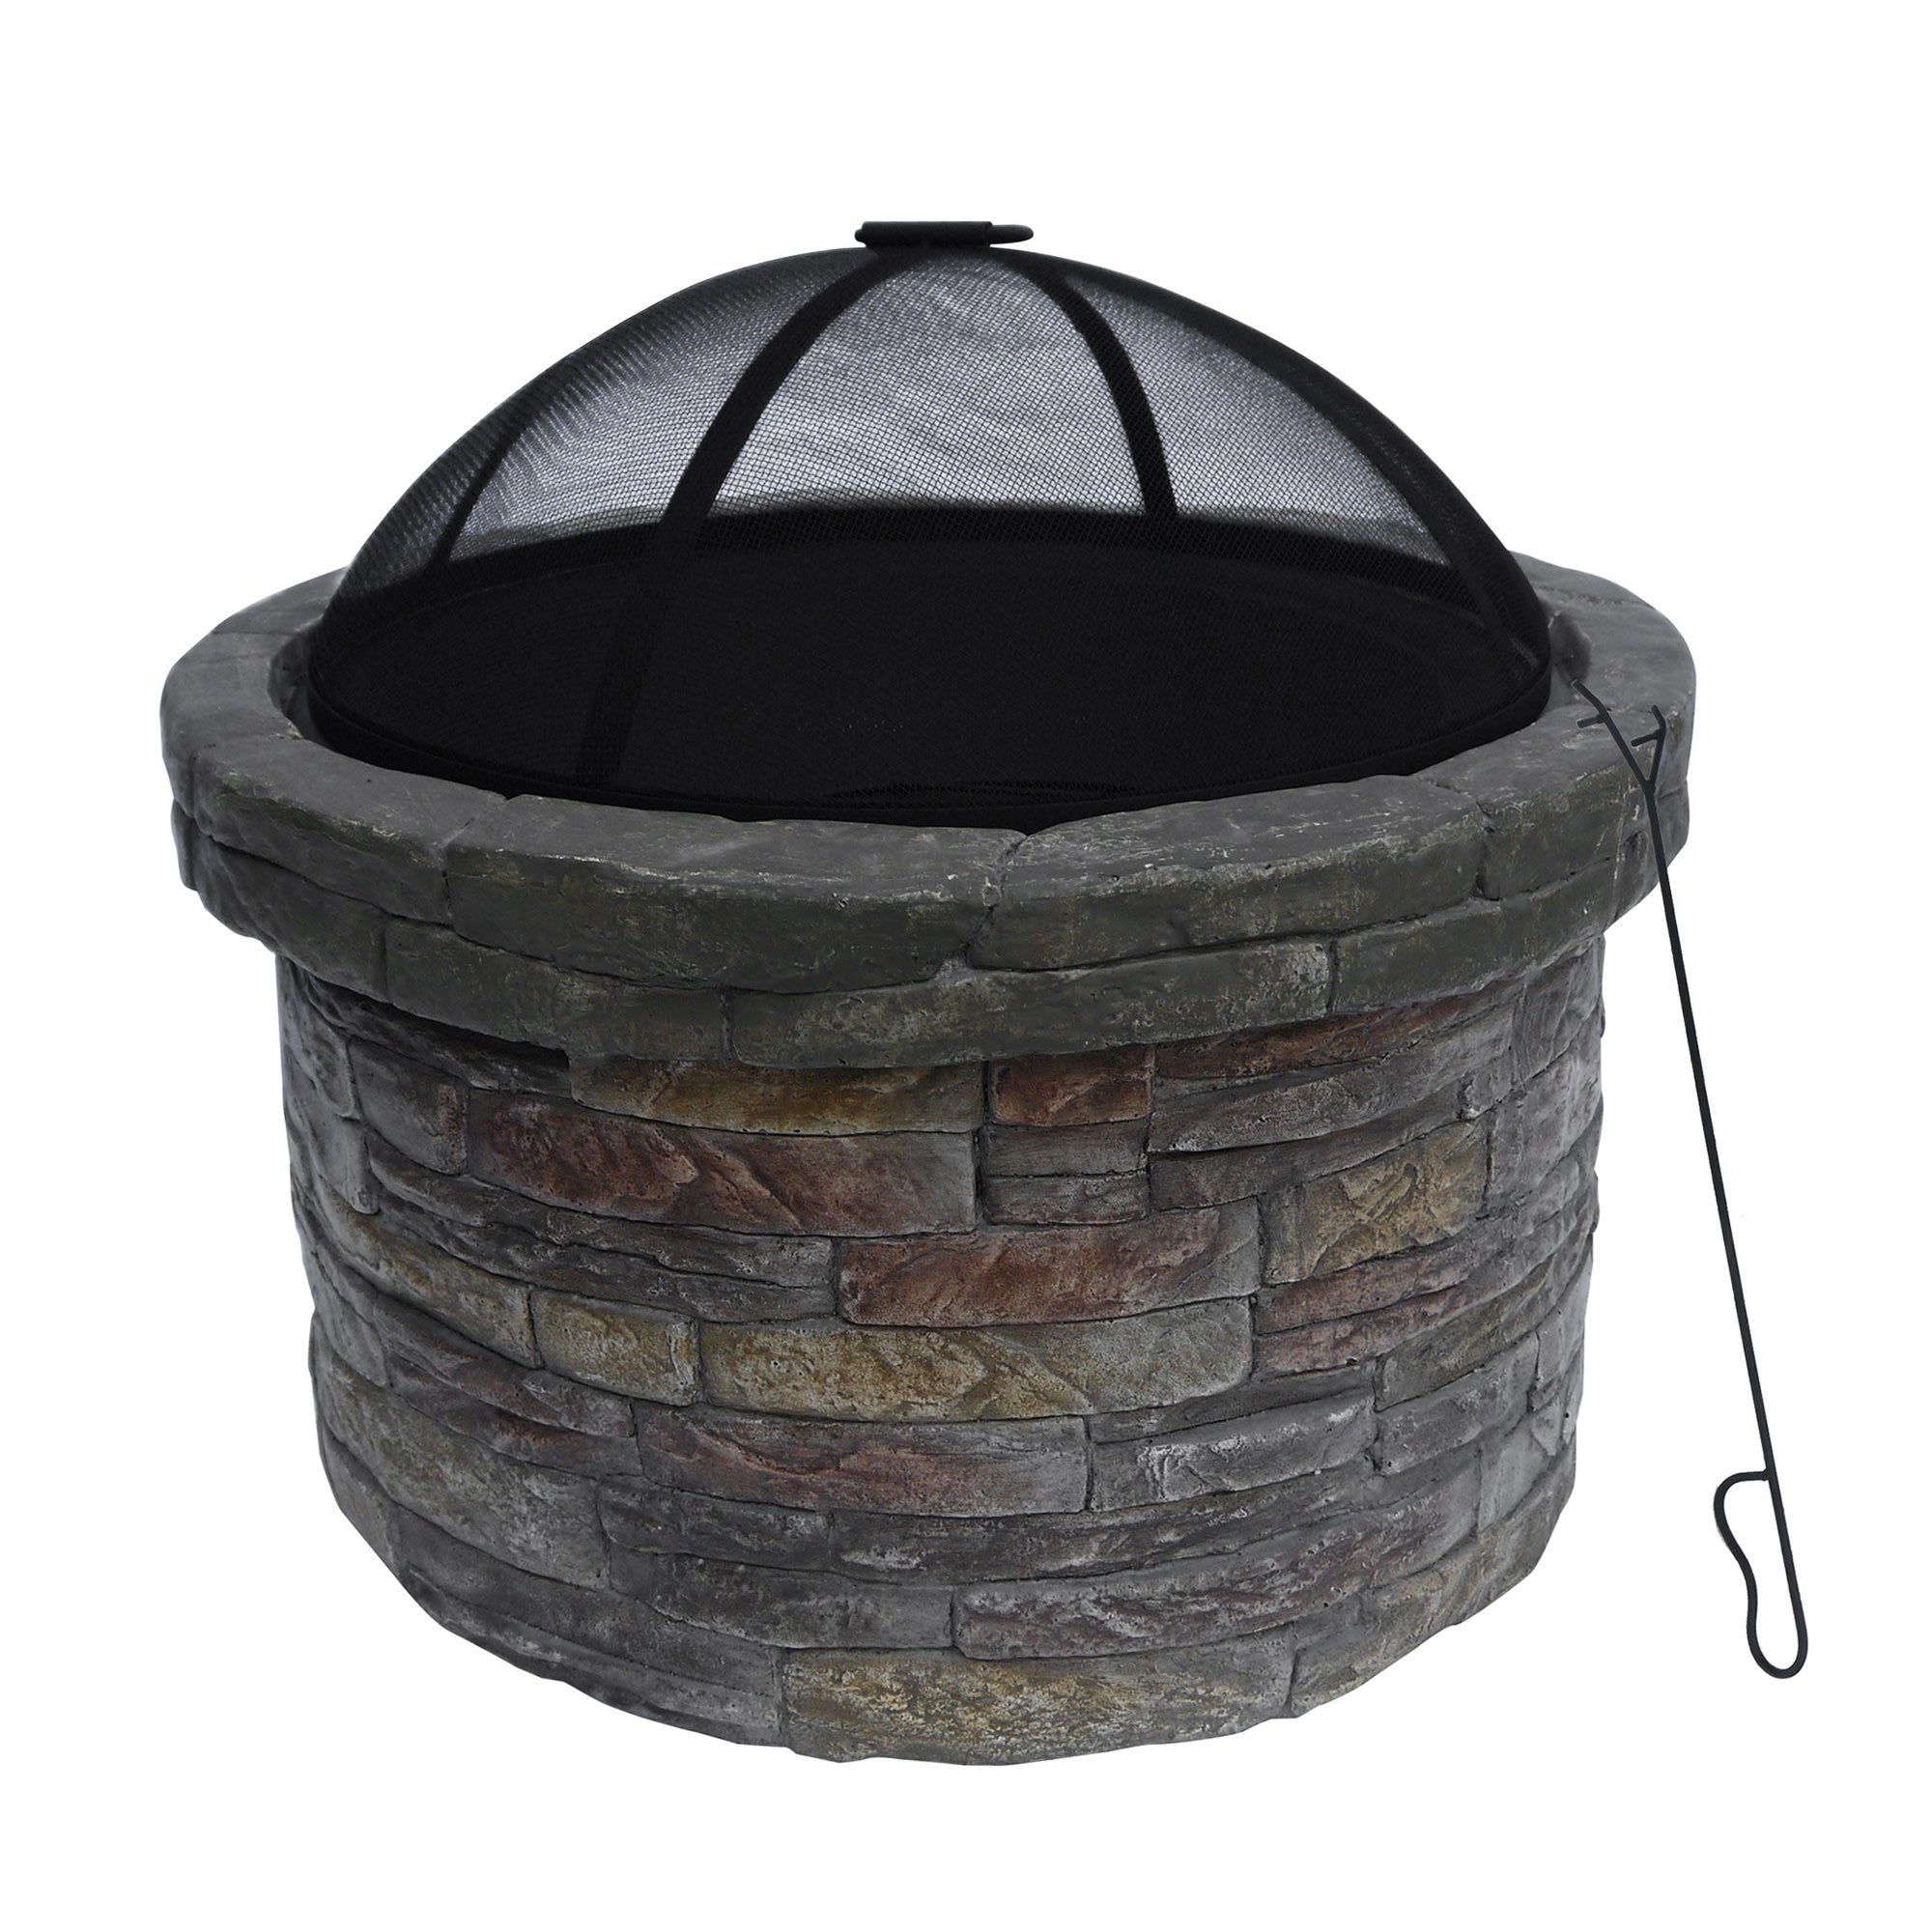 Teamson Home 27" Outdoor Round Stone Wood Burning Fire Pit with Steel Base, Natural Stone